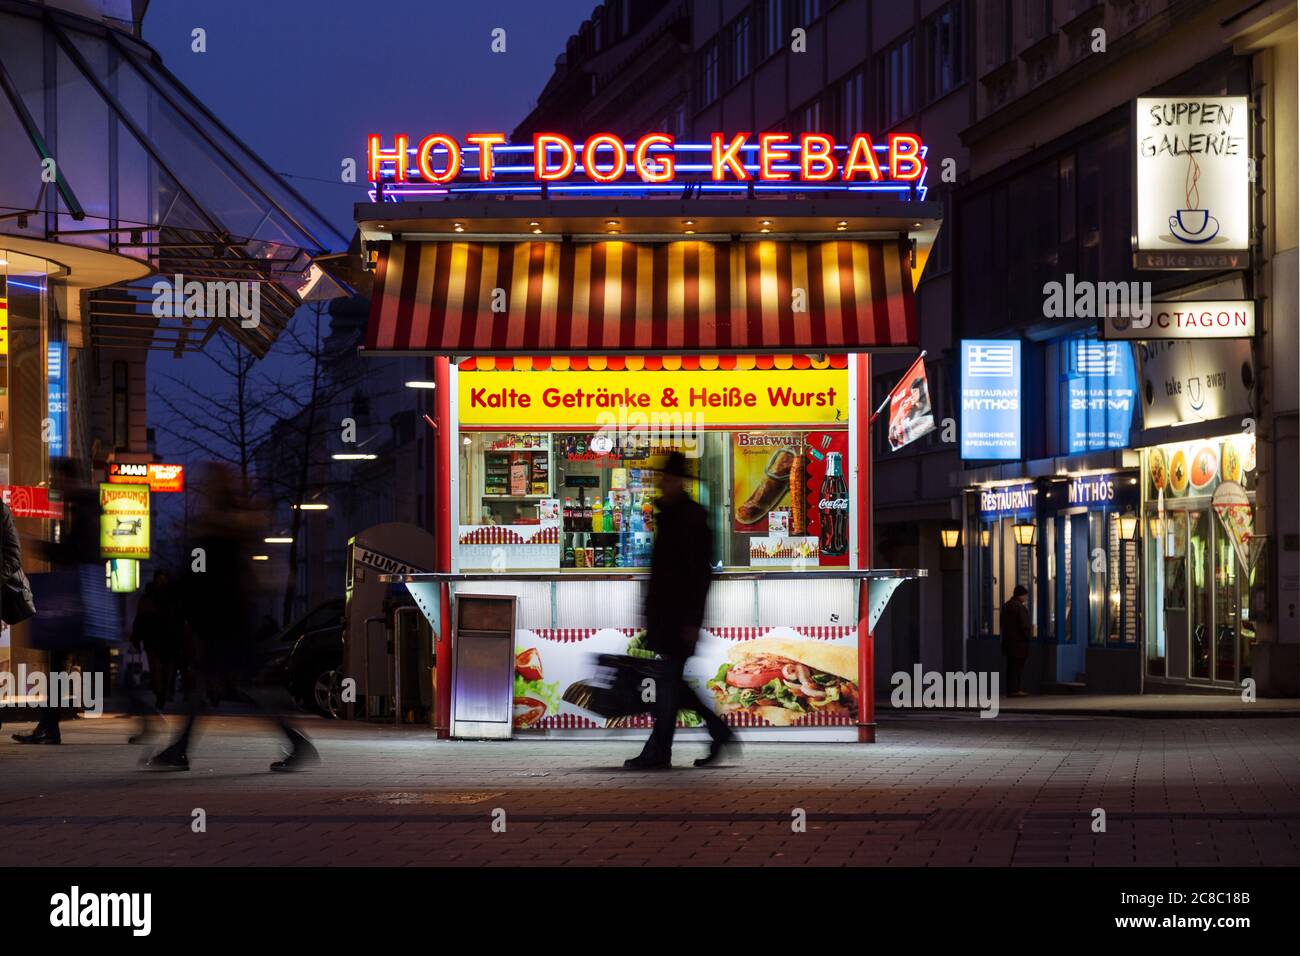 Fast food kiosk on a street in Vienna at night Stock Photo